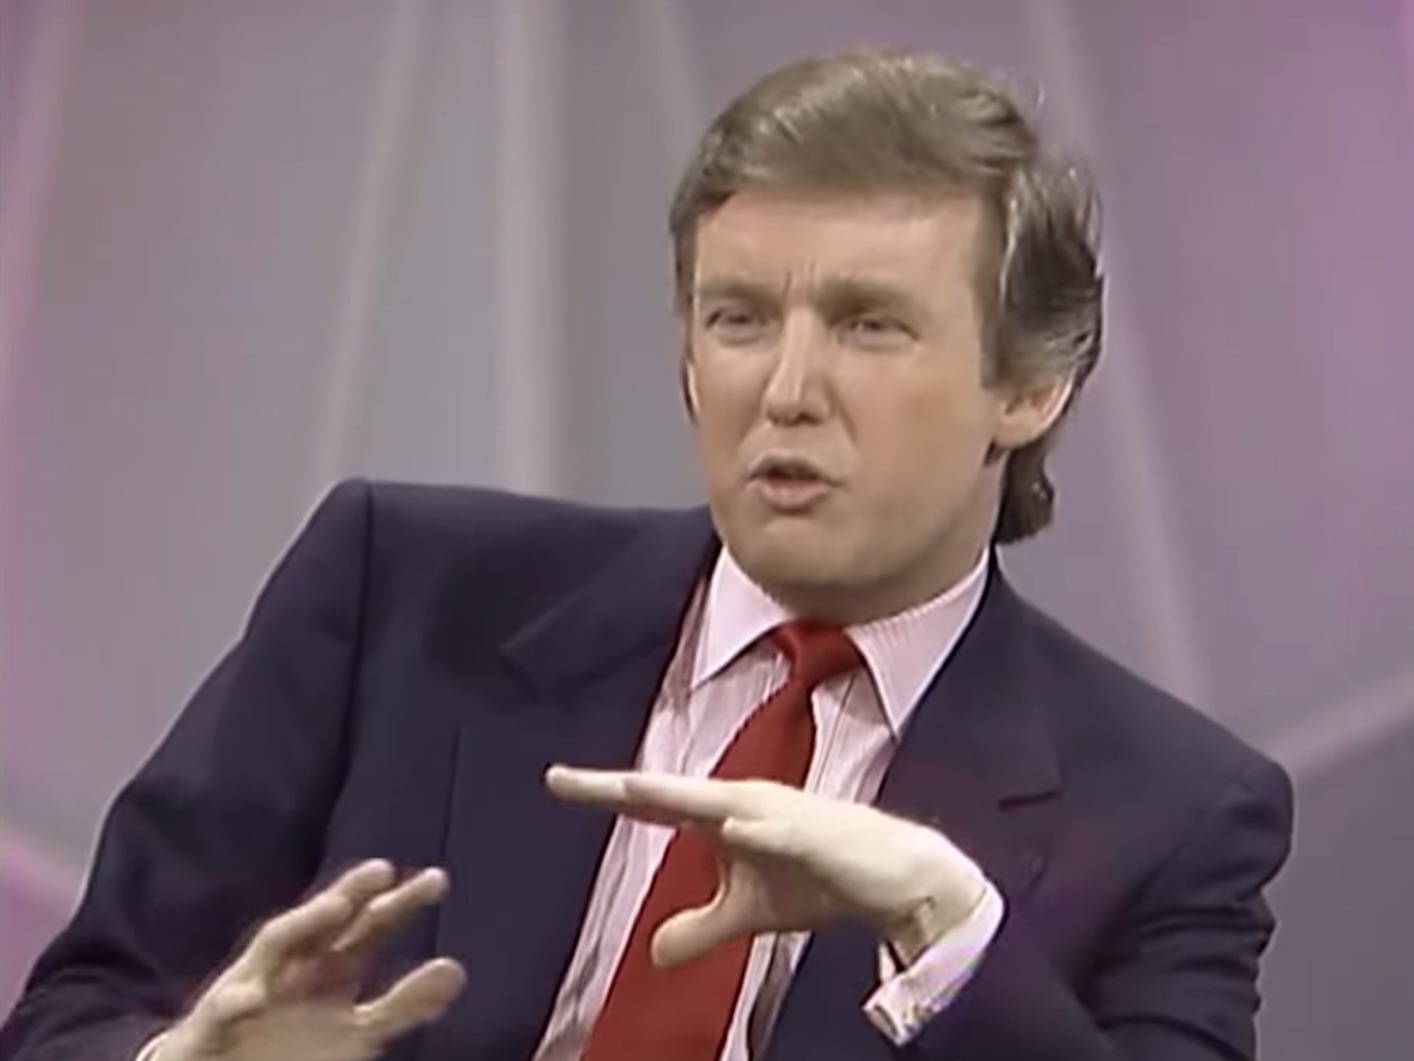 i-think-id-win-donald-trump-teased-a-presidential-run-to-oprah-in-1988.jpg